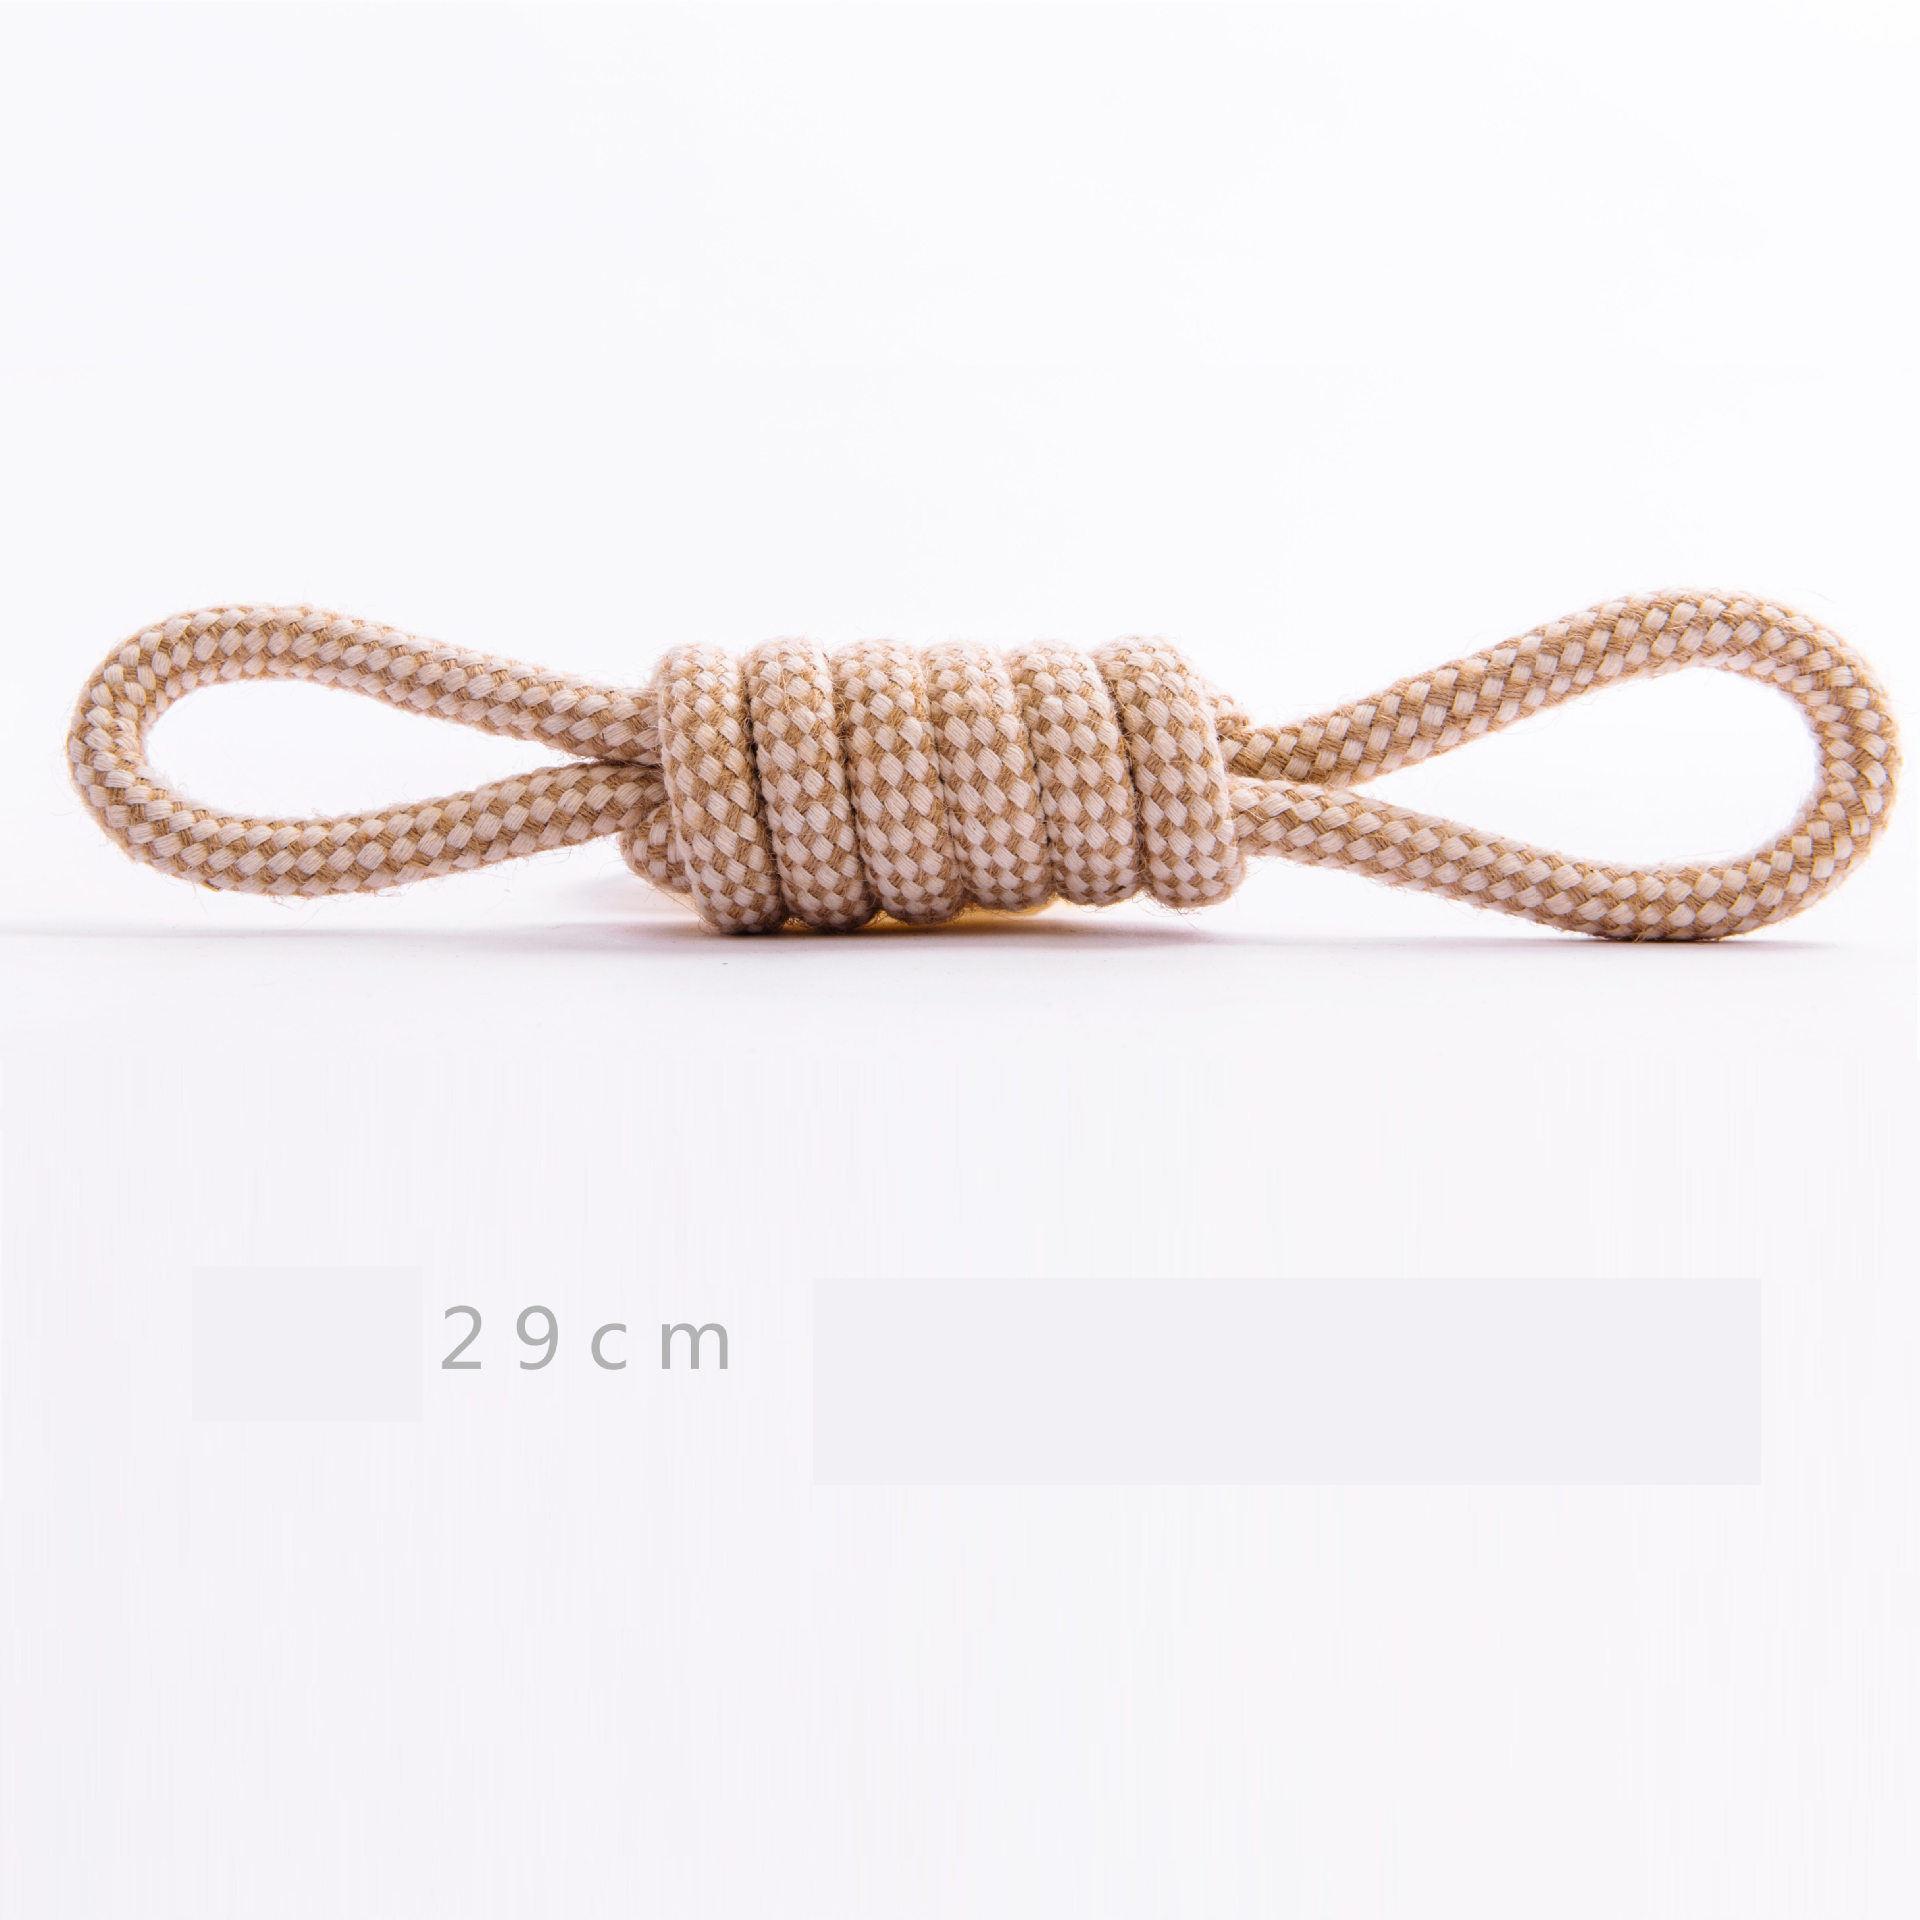 Wholesale Good Price Multi Set Eco Gray Pet Cotton Rope Knot Interactive Dog Toy Ball Pet Toy Set Chew Toys For Dog